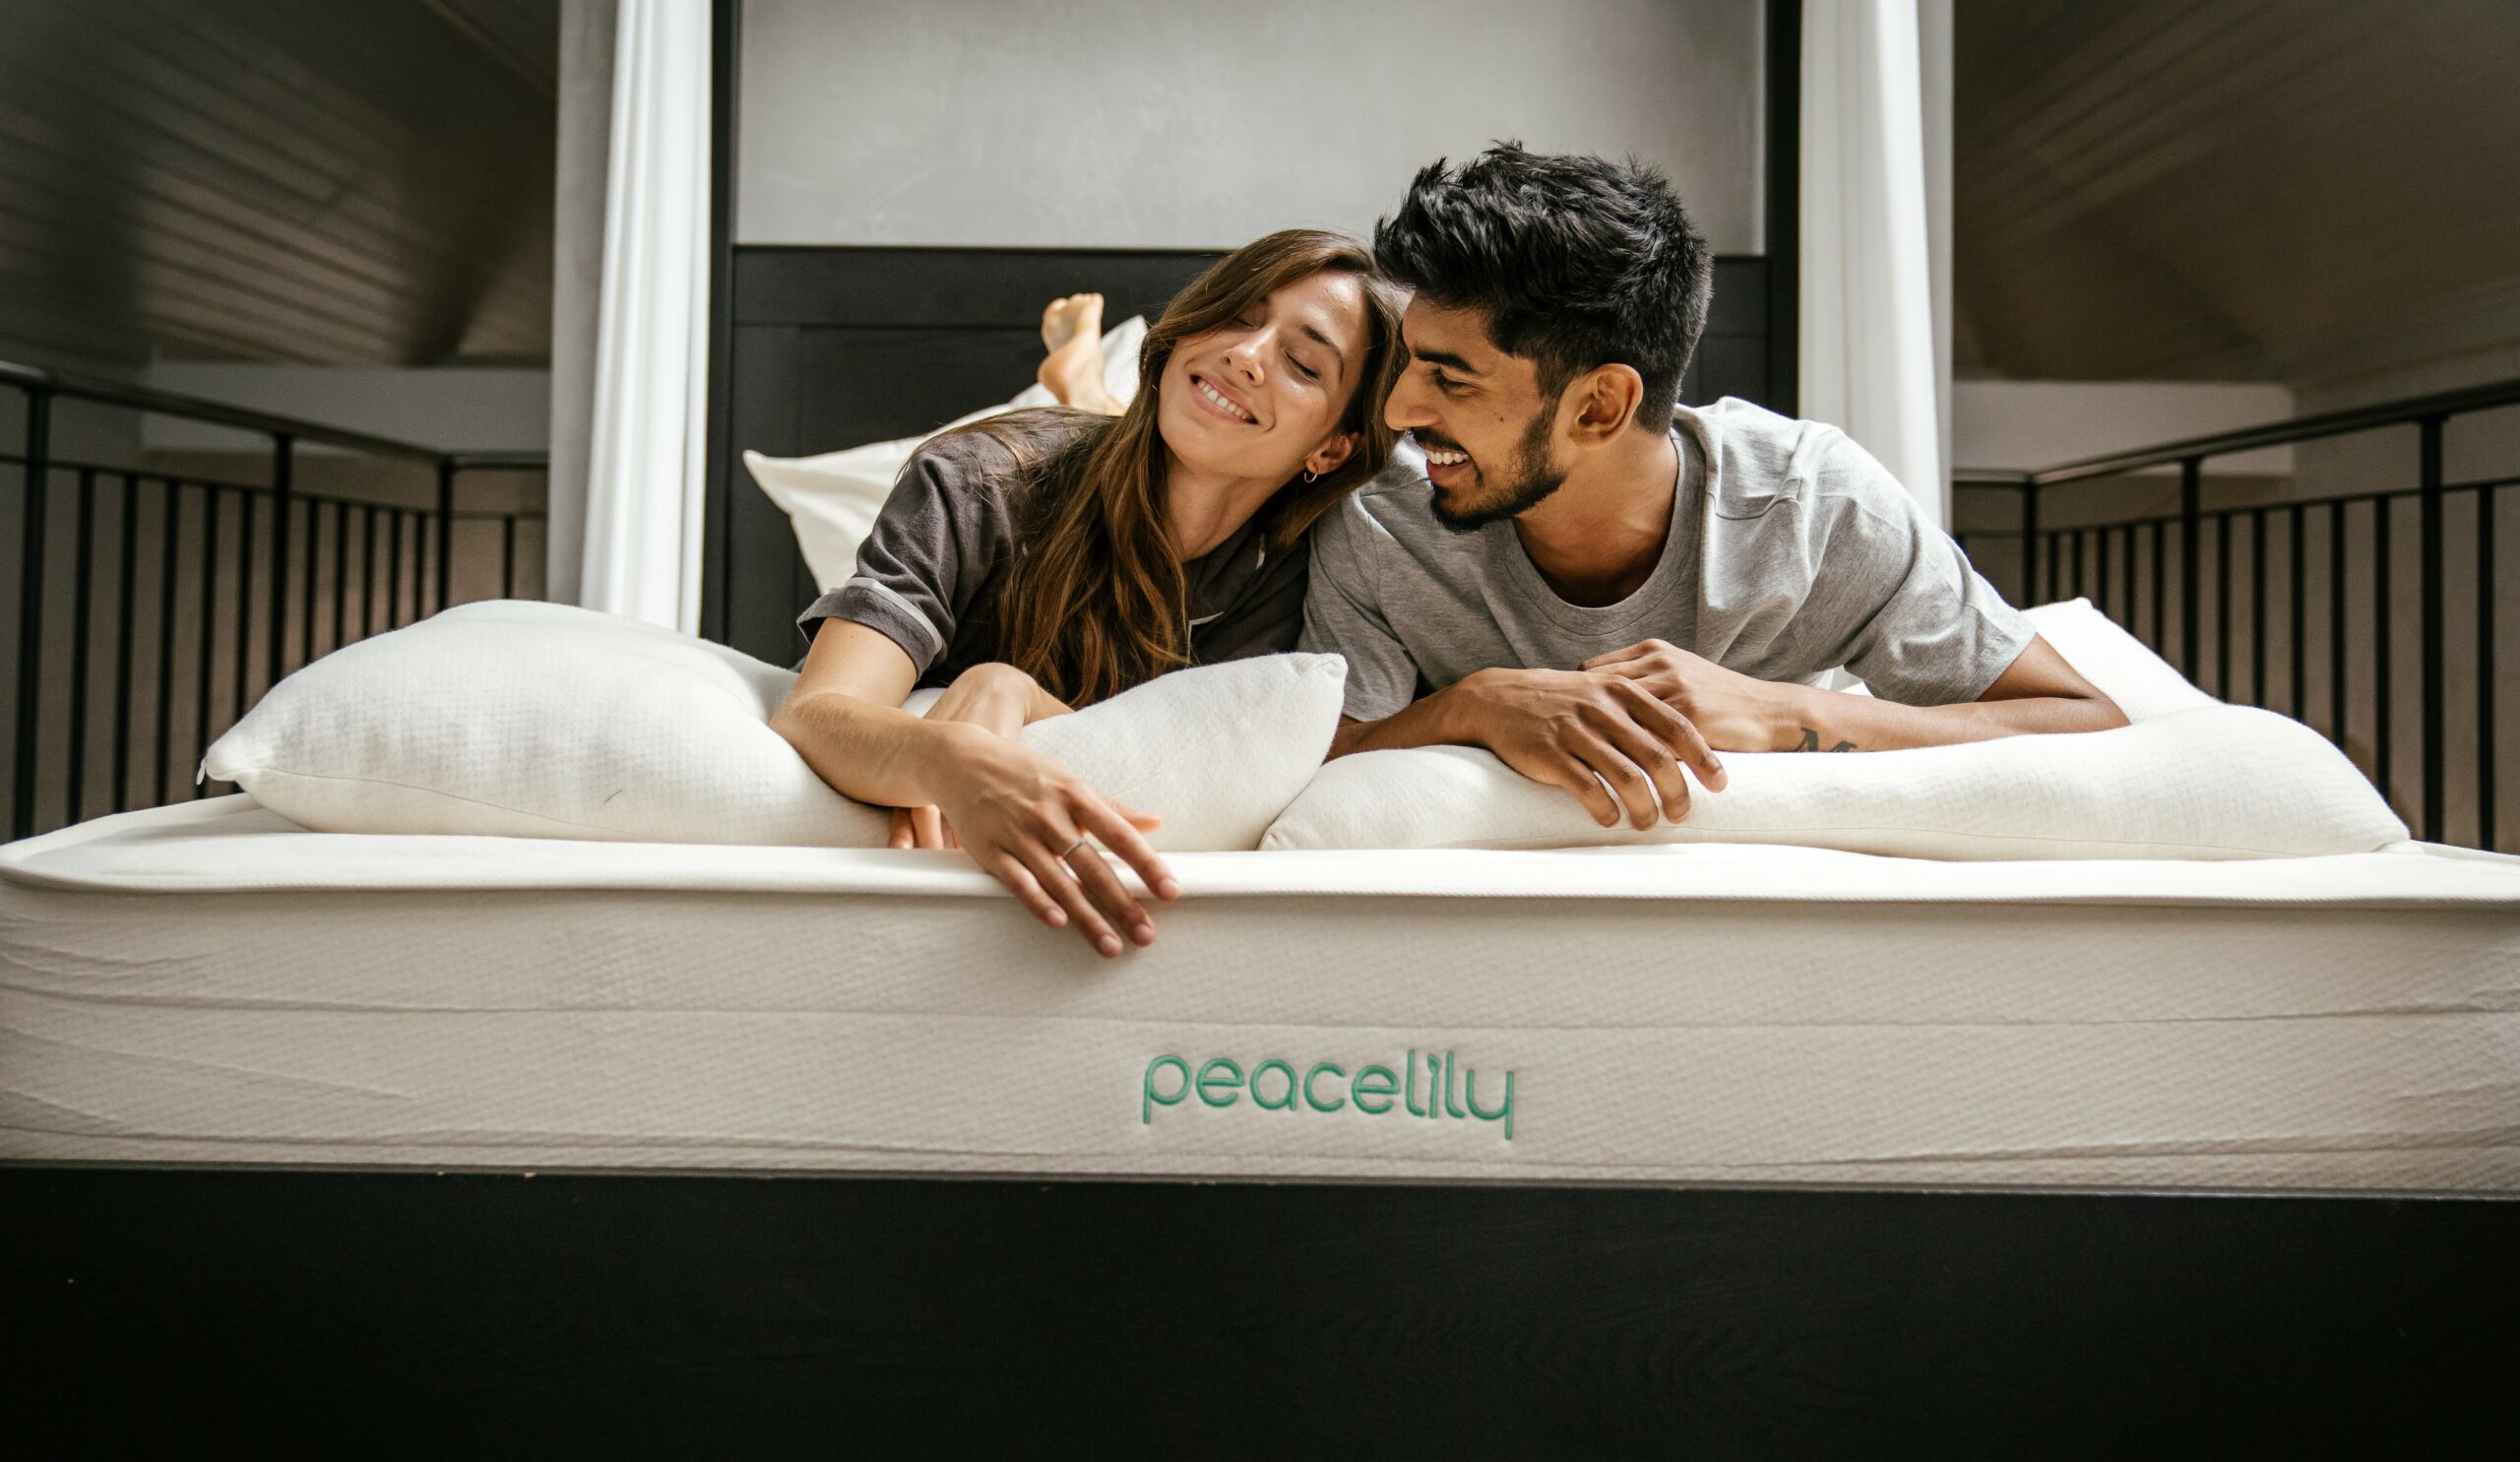 peace lily mattress review - staged mattress